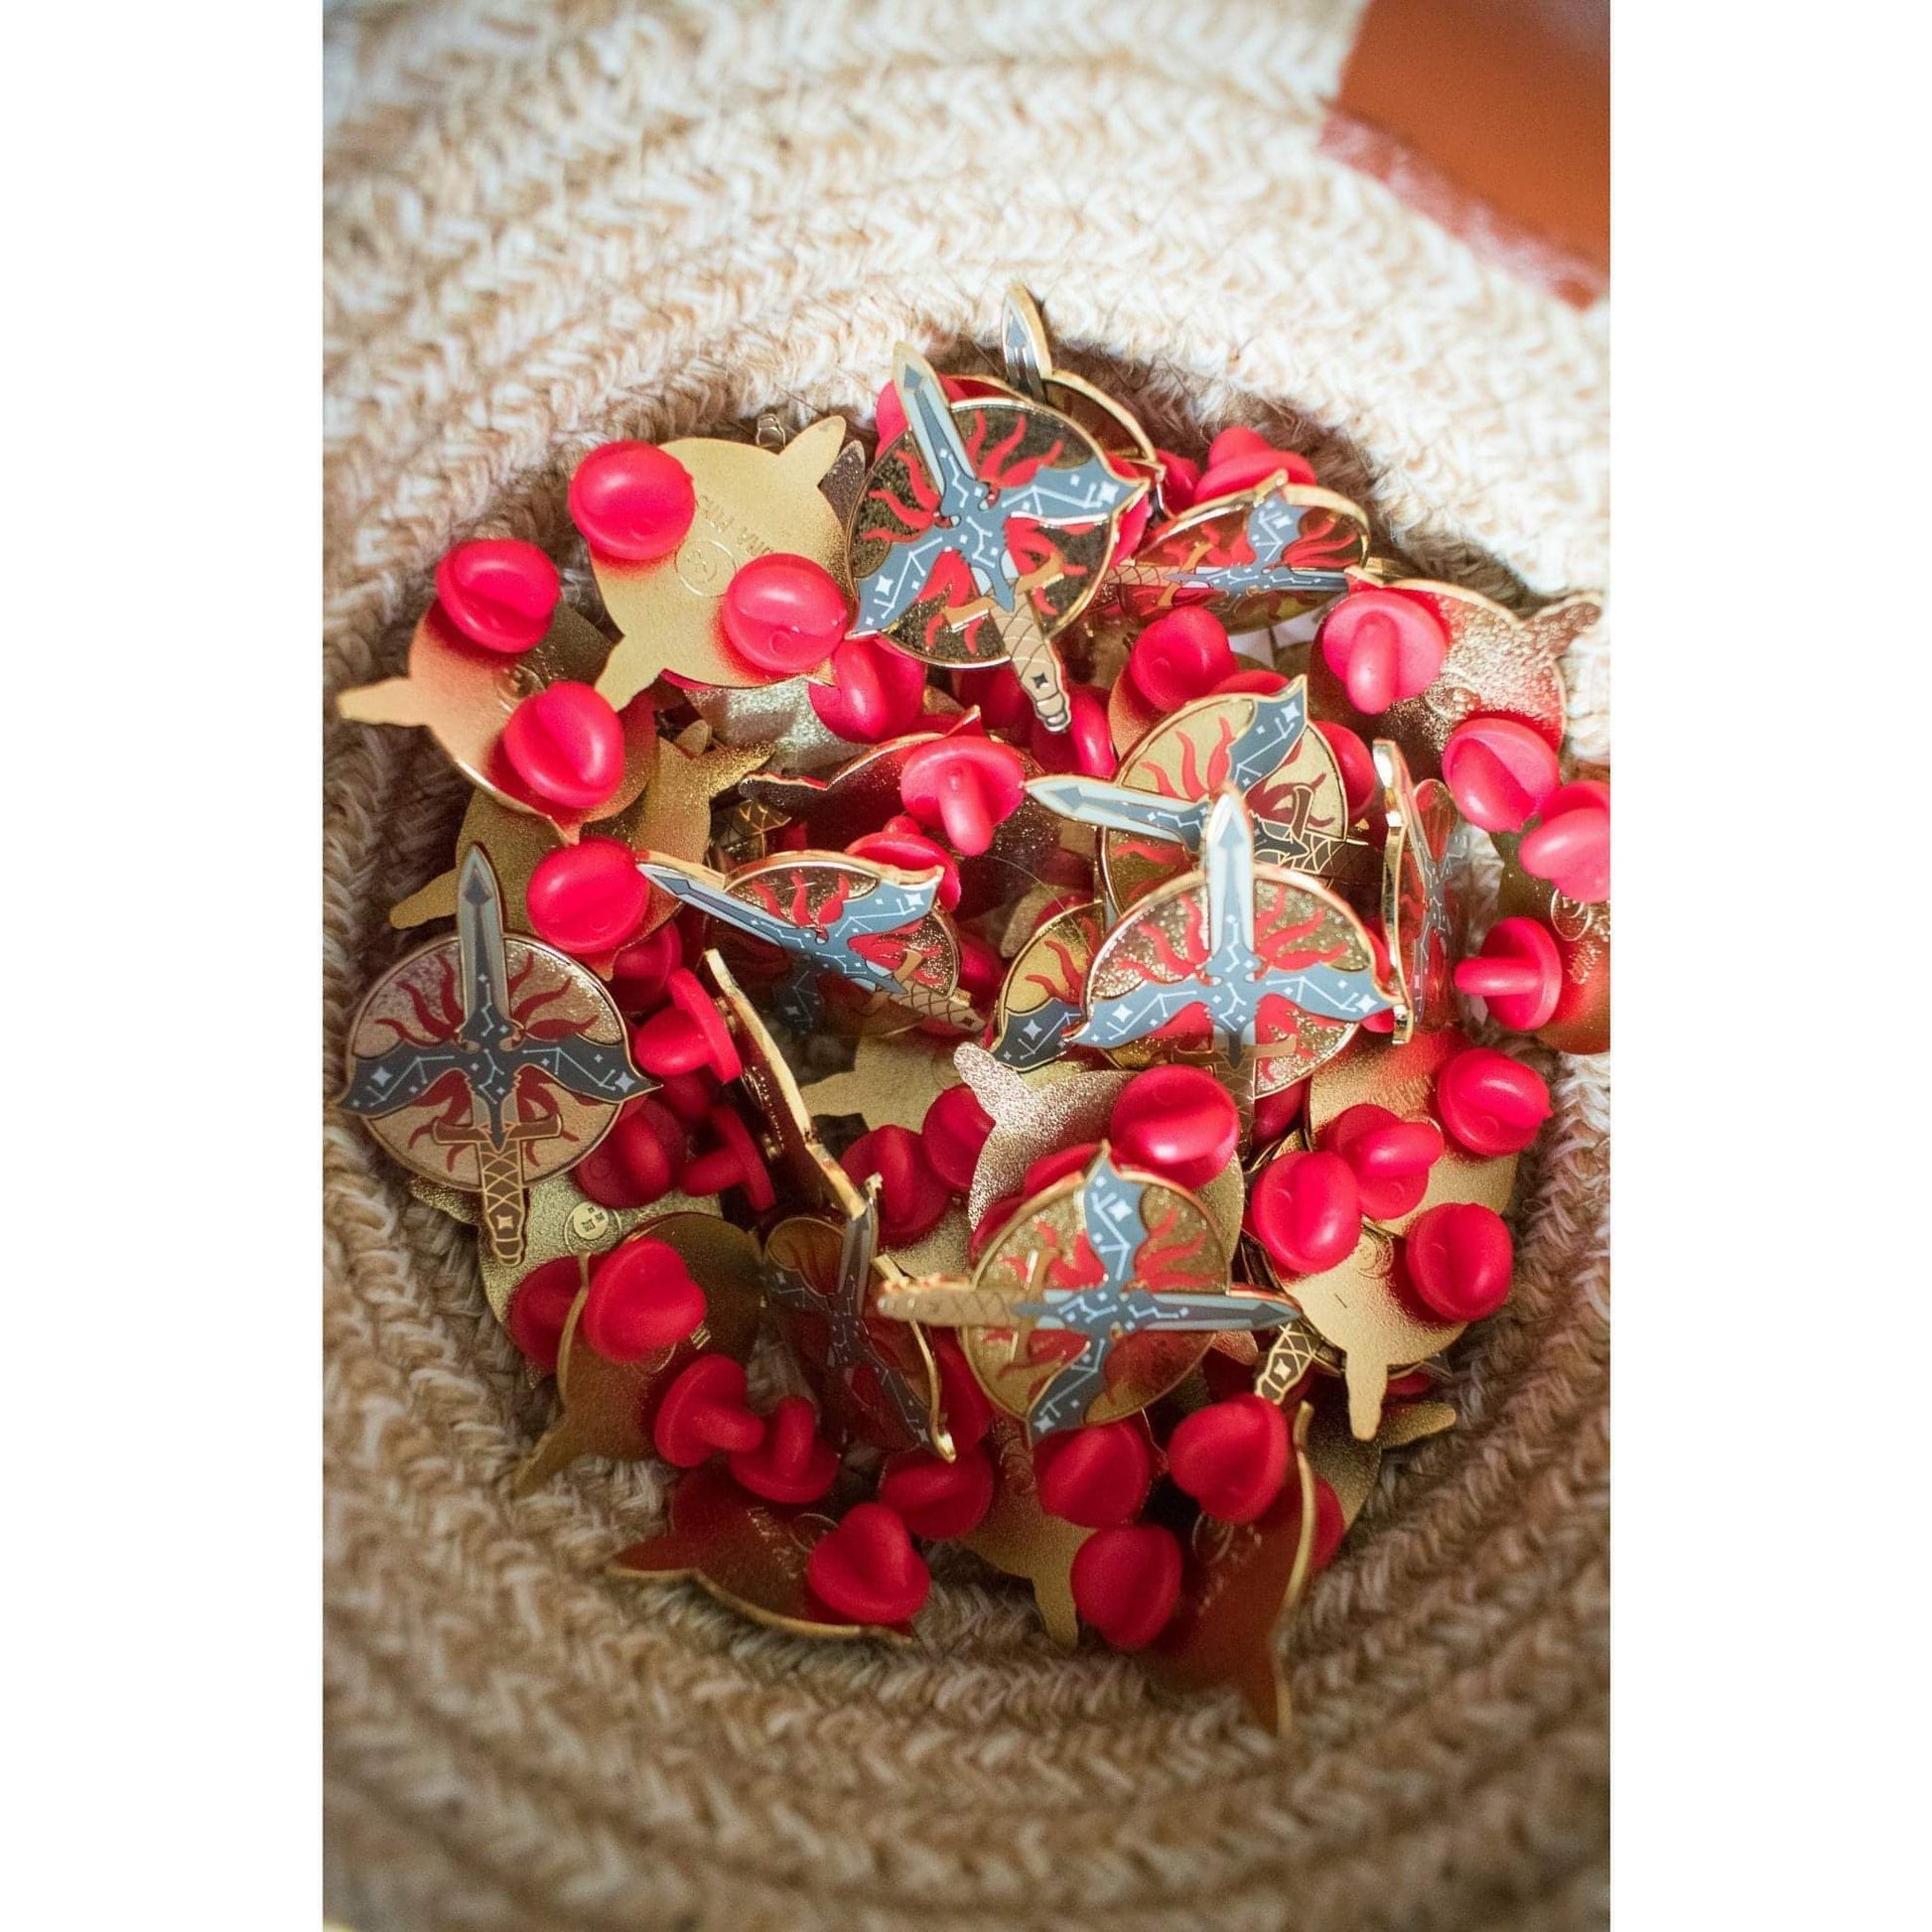 A basket full of Inquisition pins shows that they each come with two red rubber clutches.